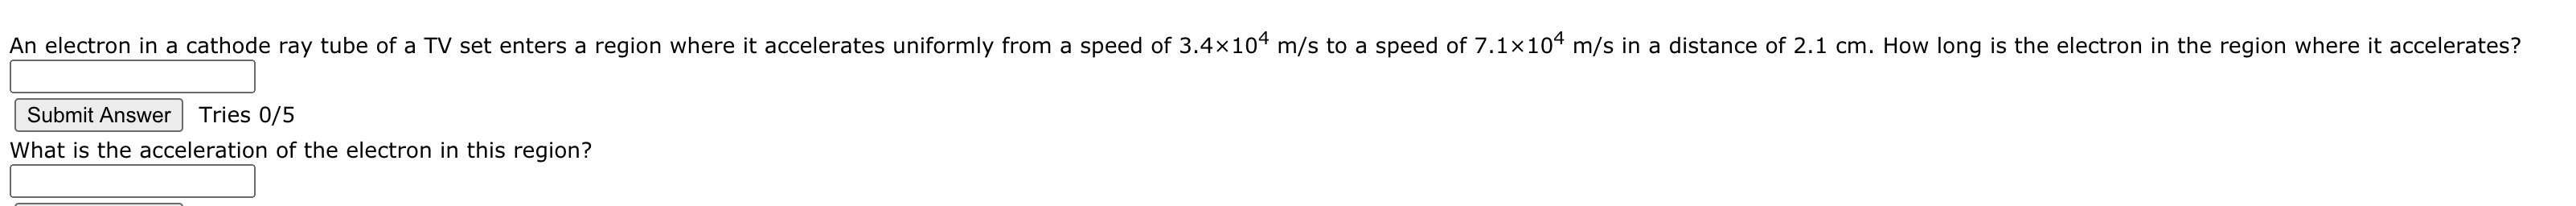 An electron in a cathode ray tube of a TV set enters a region where it accelerates uniformly from a speed of 3.4×104 m/s to a speed of 7.1×104 m/s in a distance of 2.1 cm. How long is the electron in the region where it accelerates?
Submit Answer
Tries 0/5
What is the acceleration of the electron in this region?
